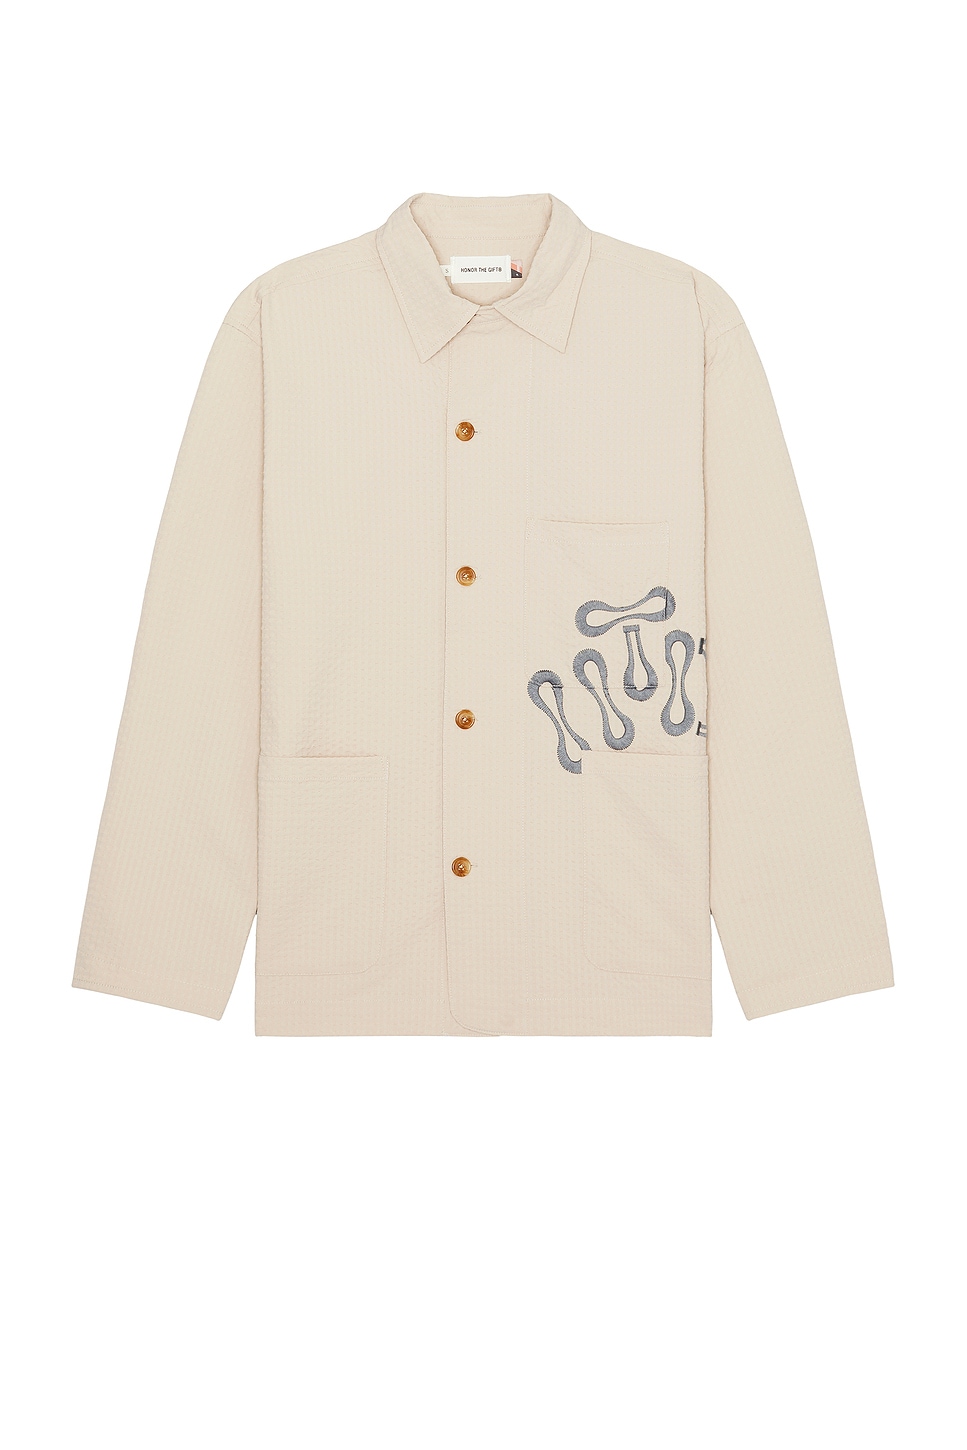 Image 1 of Honor The Gift Light Jacket in Tan